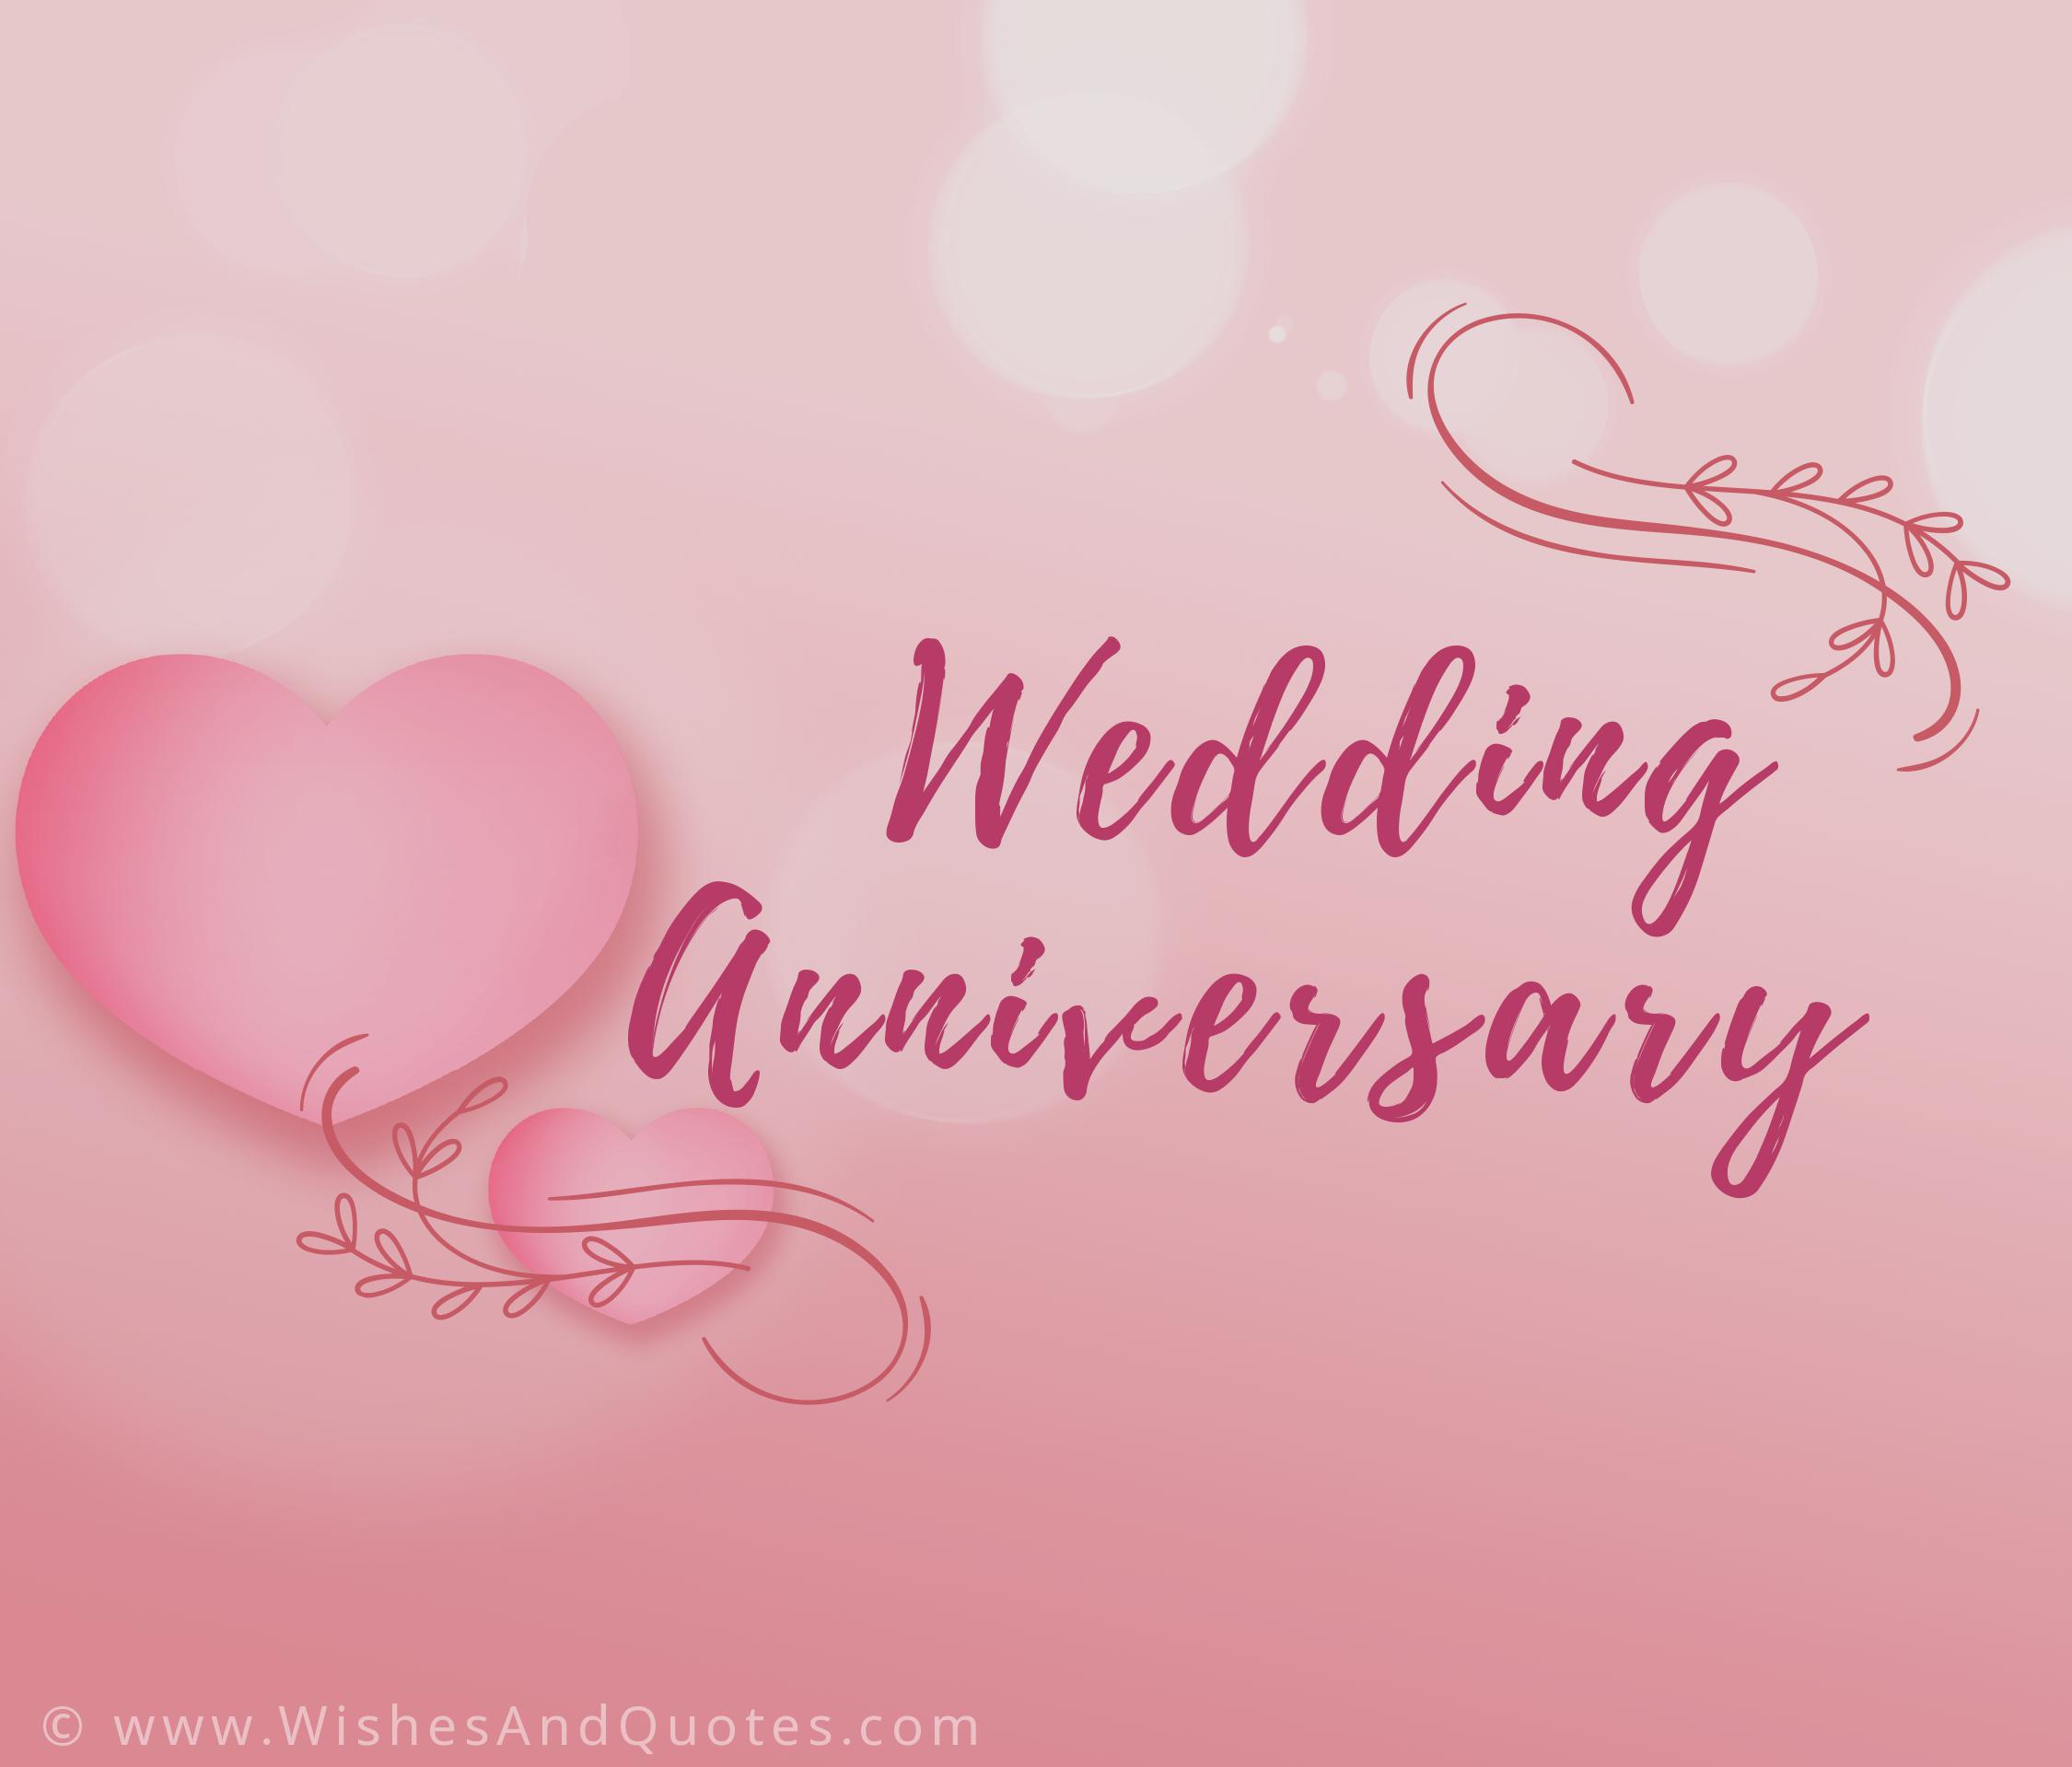 Wedding Anniversary Wishes and Messages for Sister